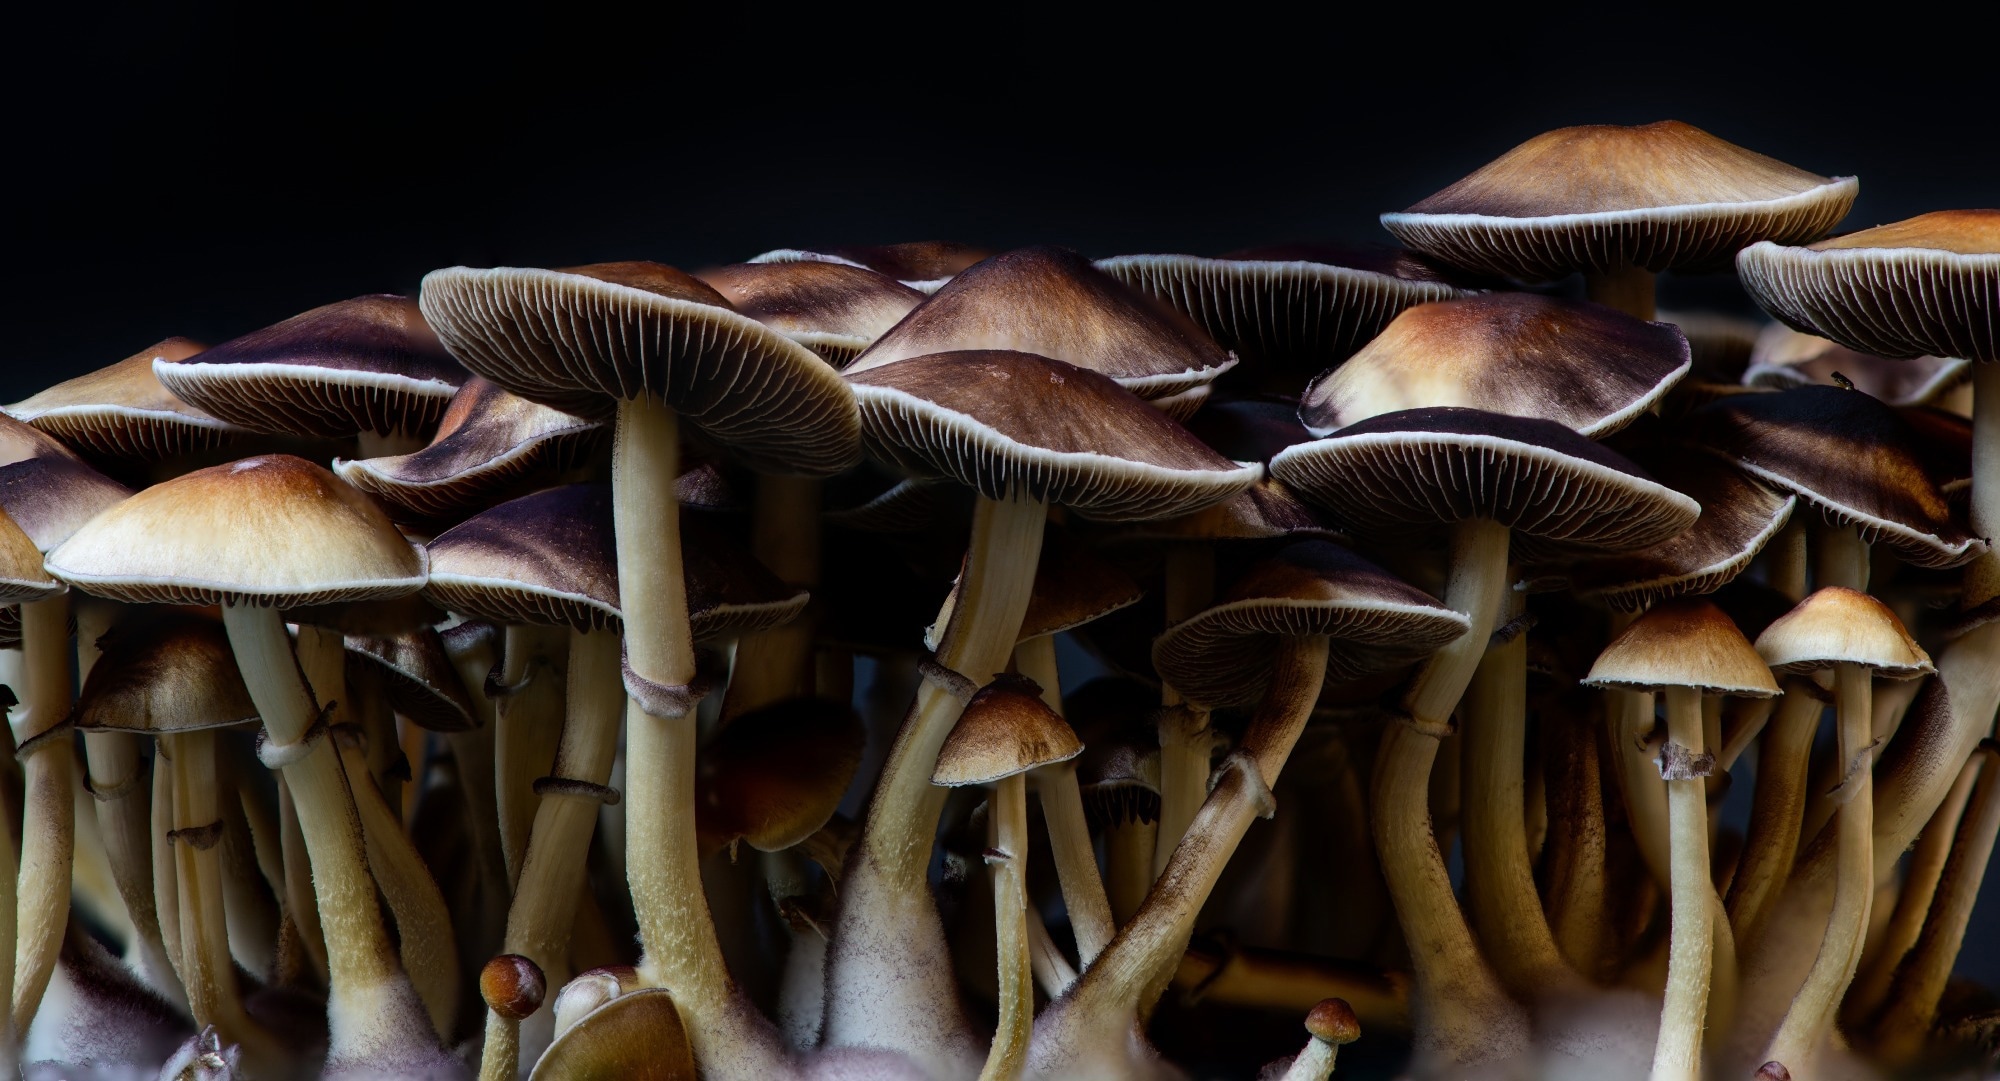 Mushrooms - A Biodegradable Solution for a Green Electronic Future